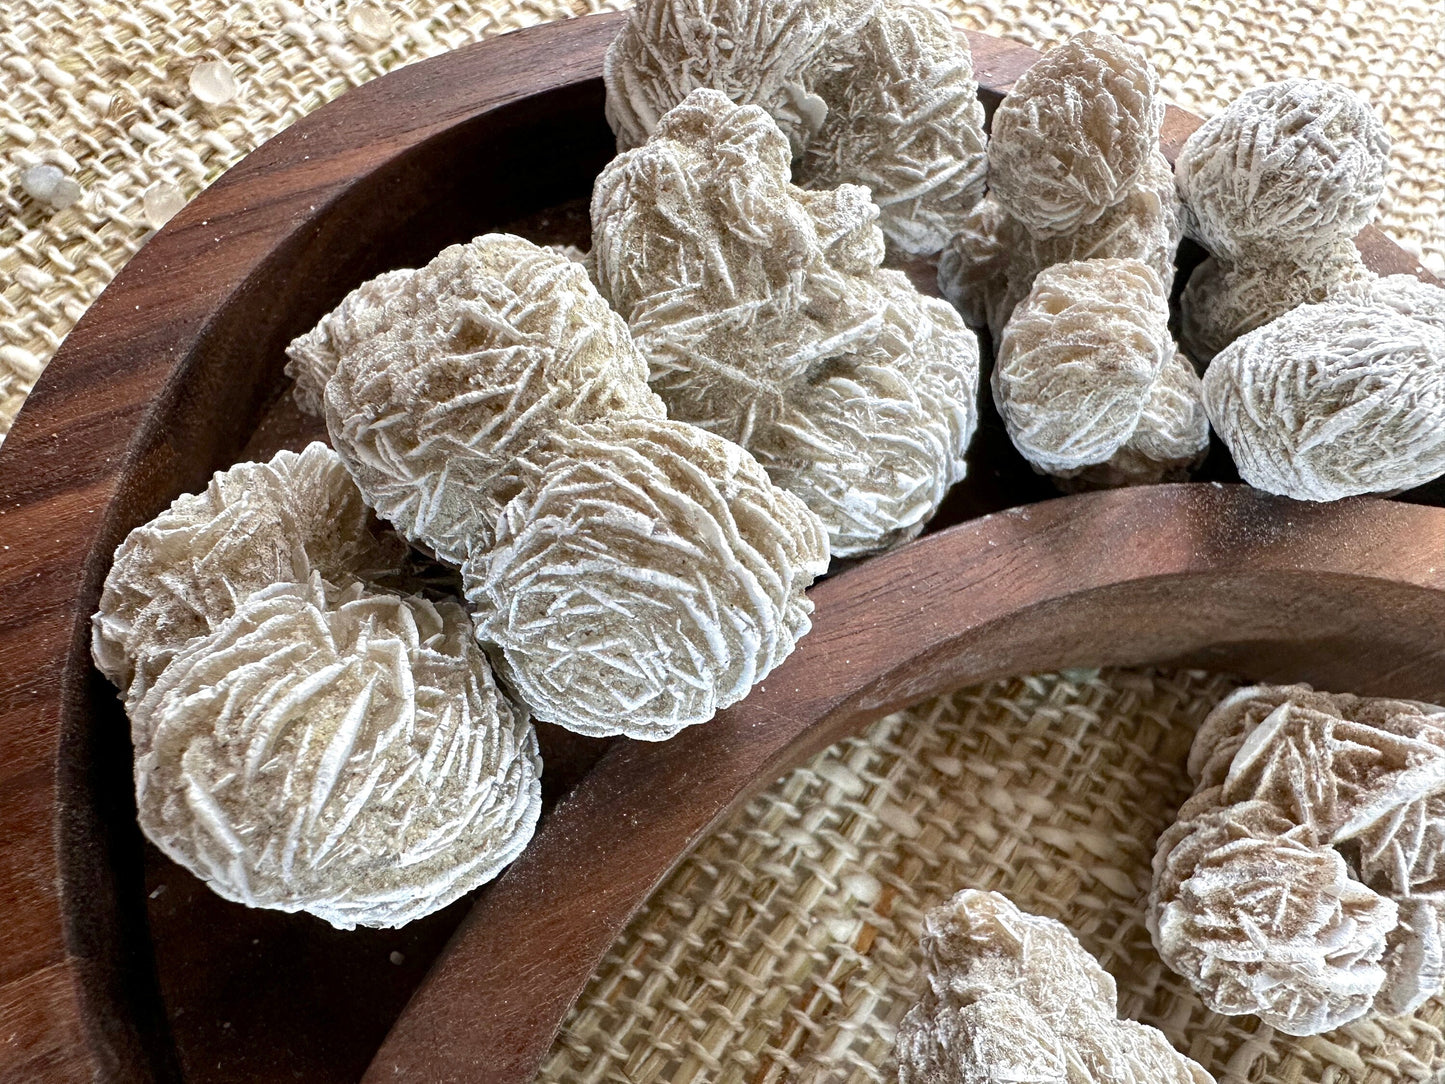 Desert Rose Selenite Buds / Clusters 1-2 inches